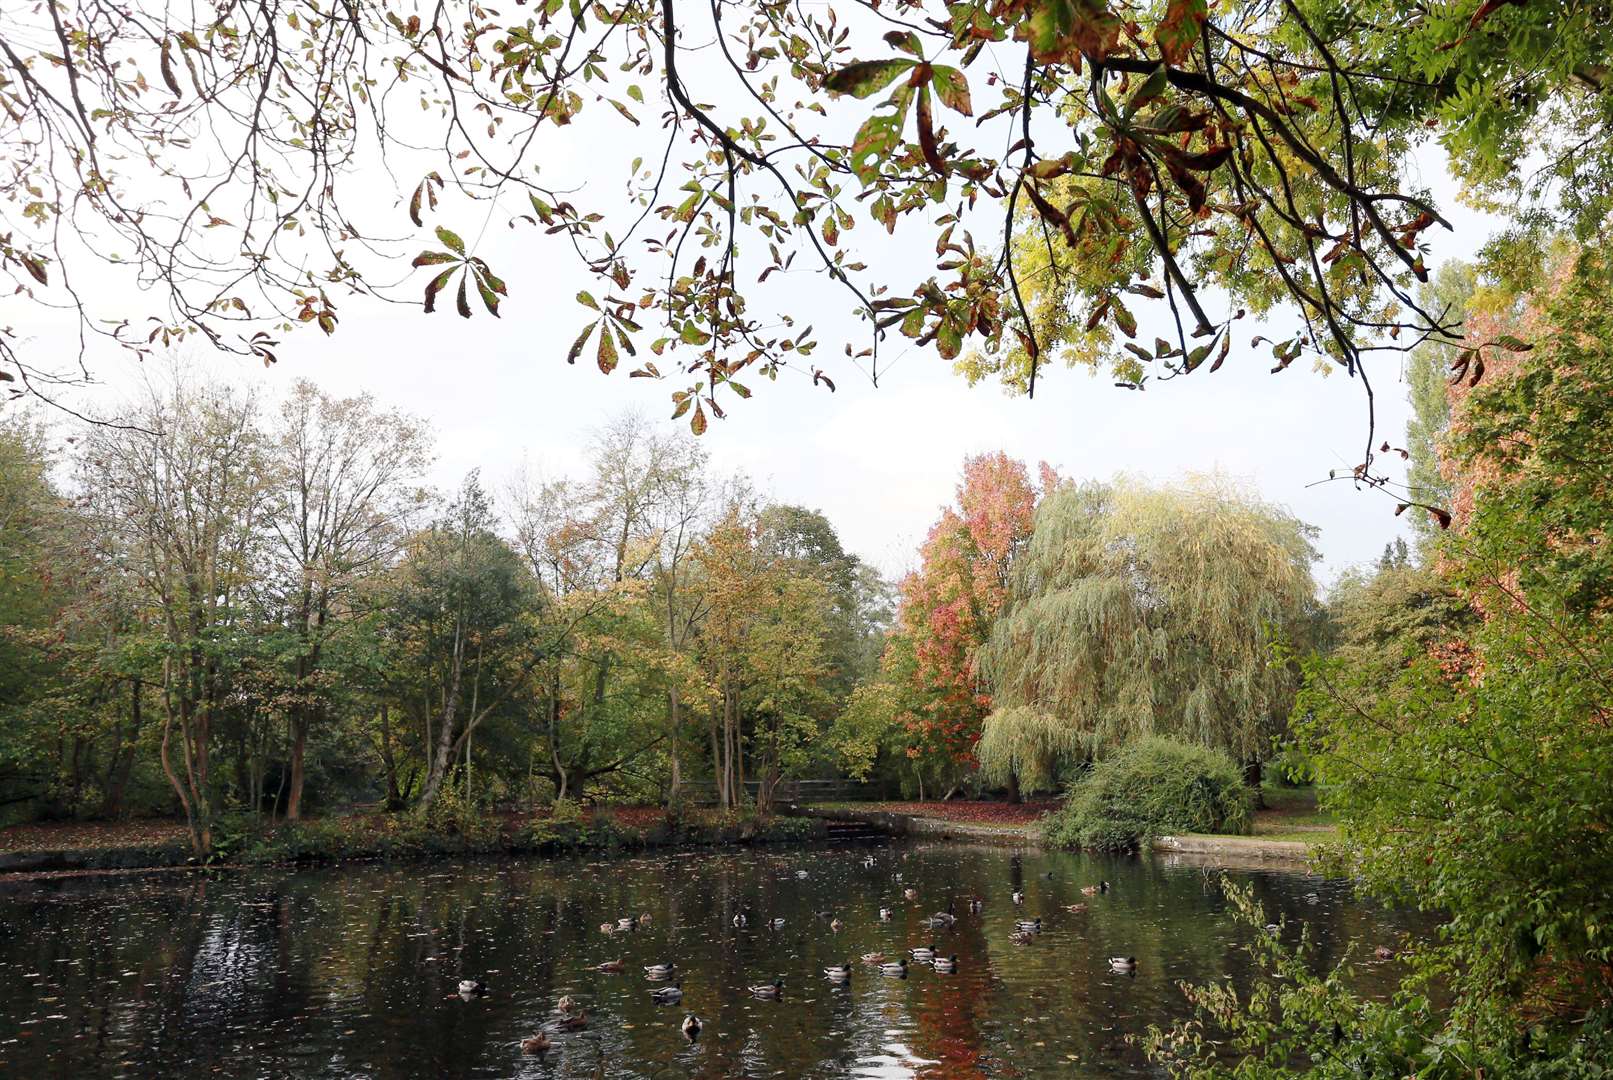 Sevenoaks council remain committed to the redevelopment of Bradbourne Lakes